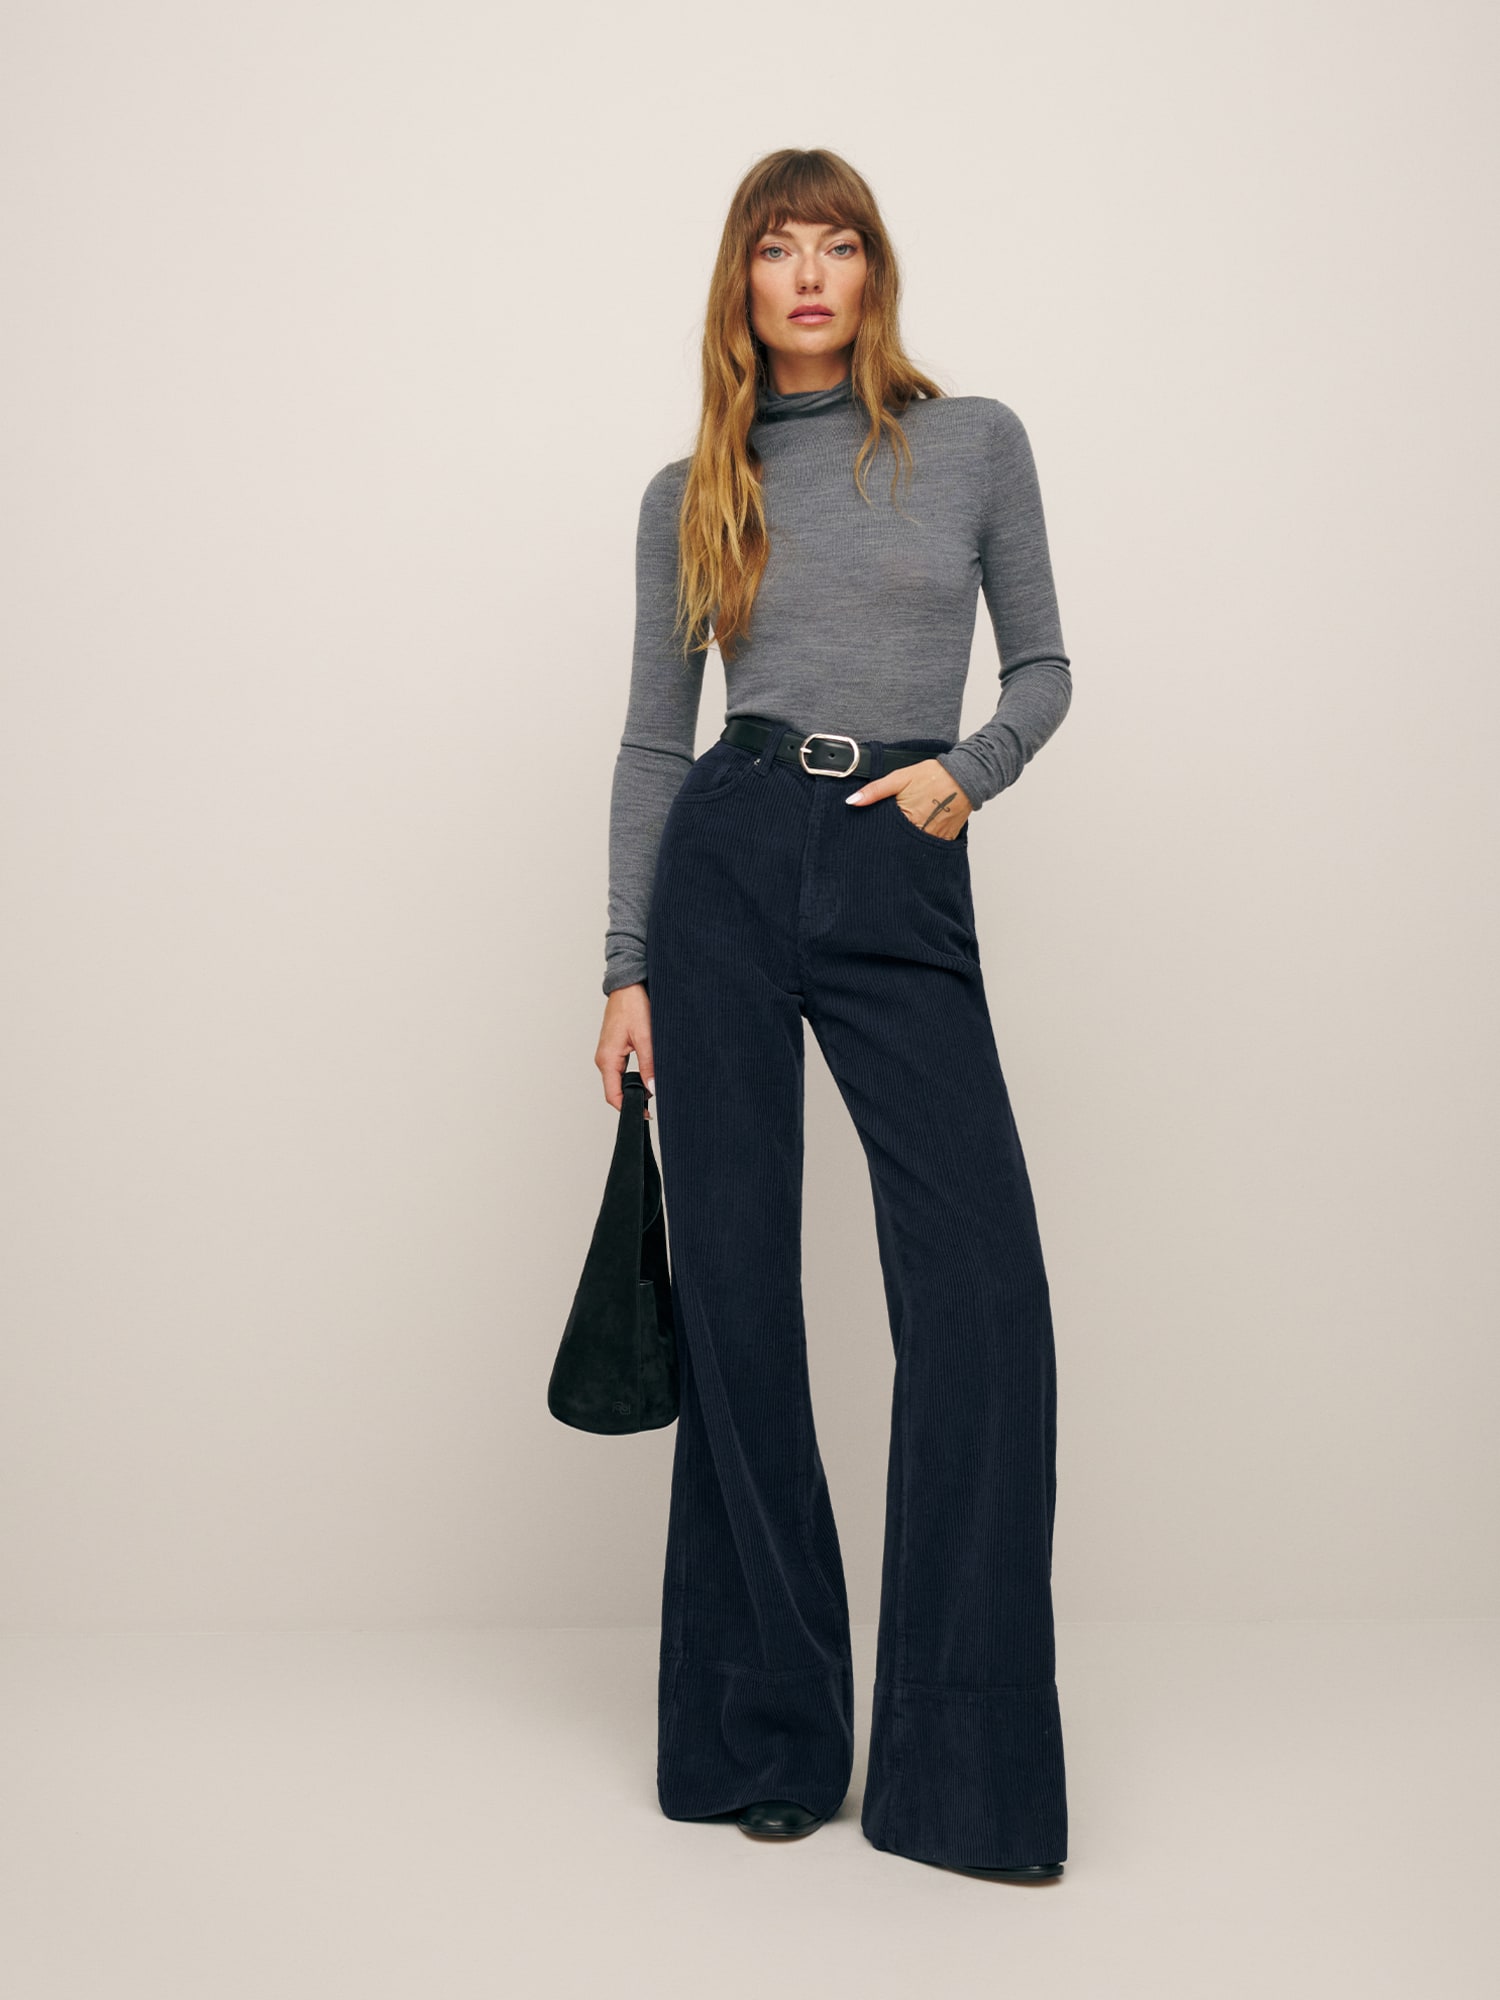 Relaxed Flare Lounge Pant